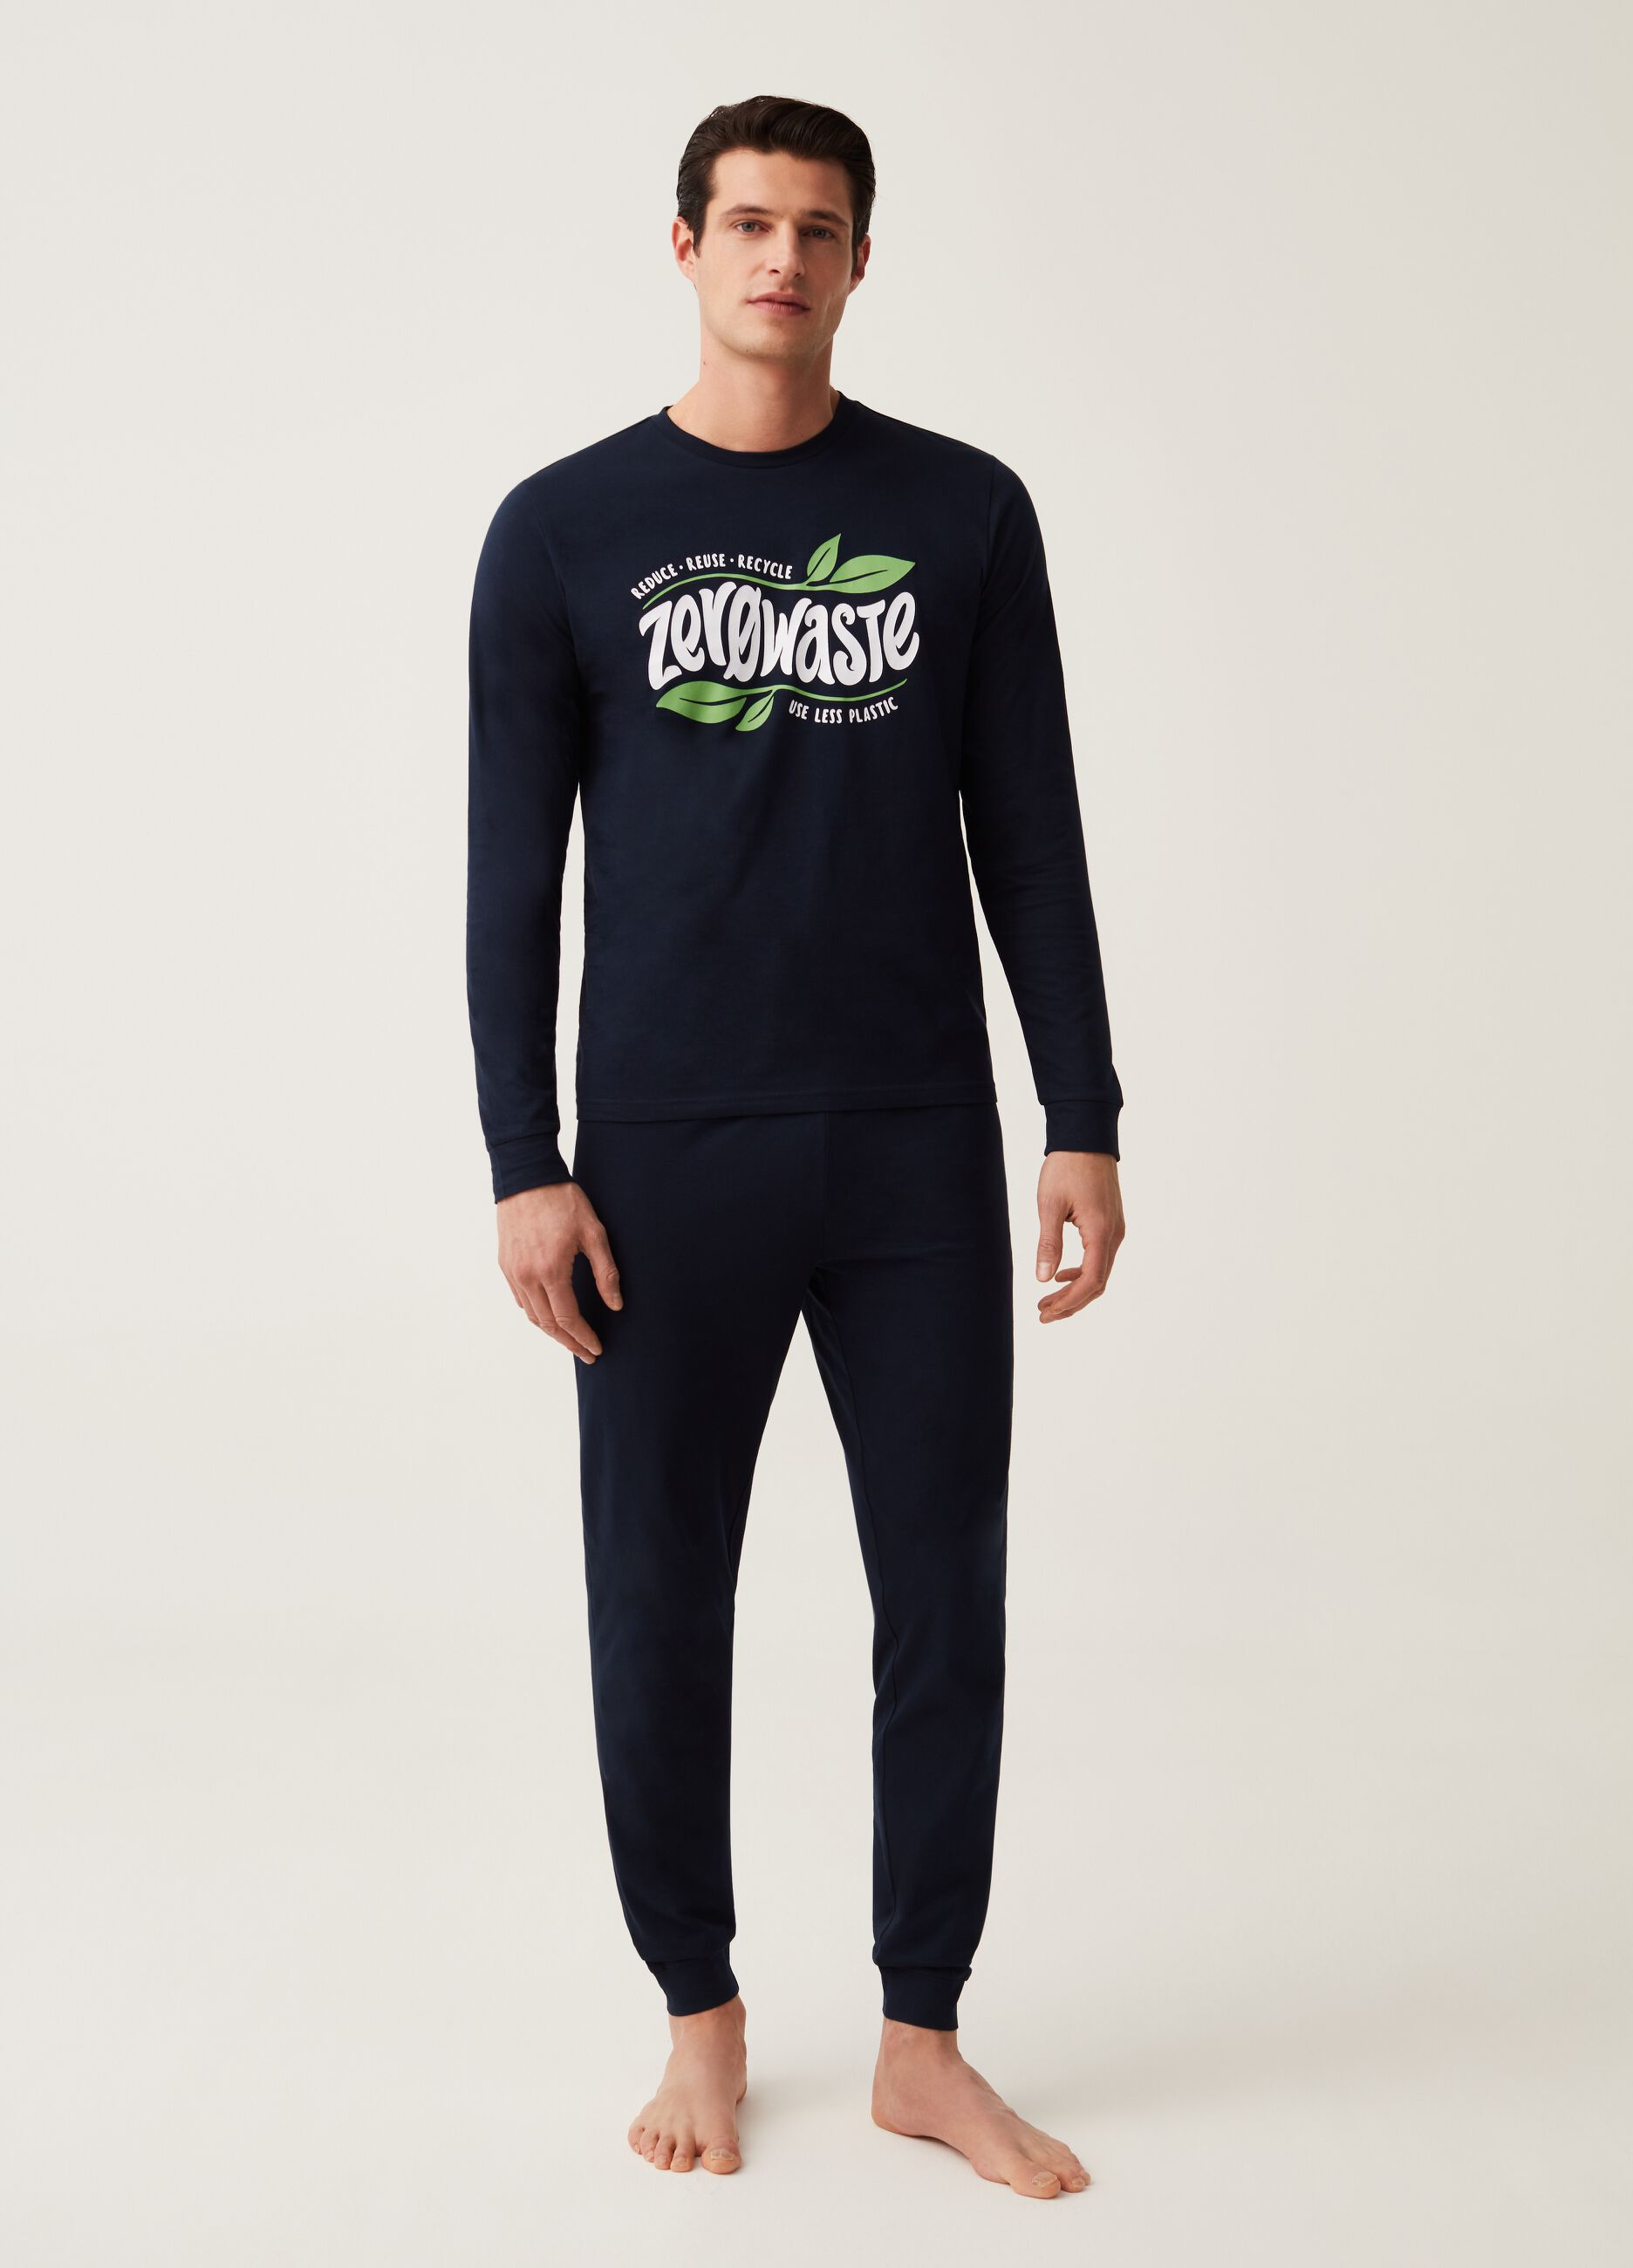 Full-length pyjamas with printed lettering